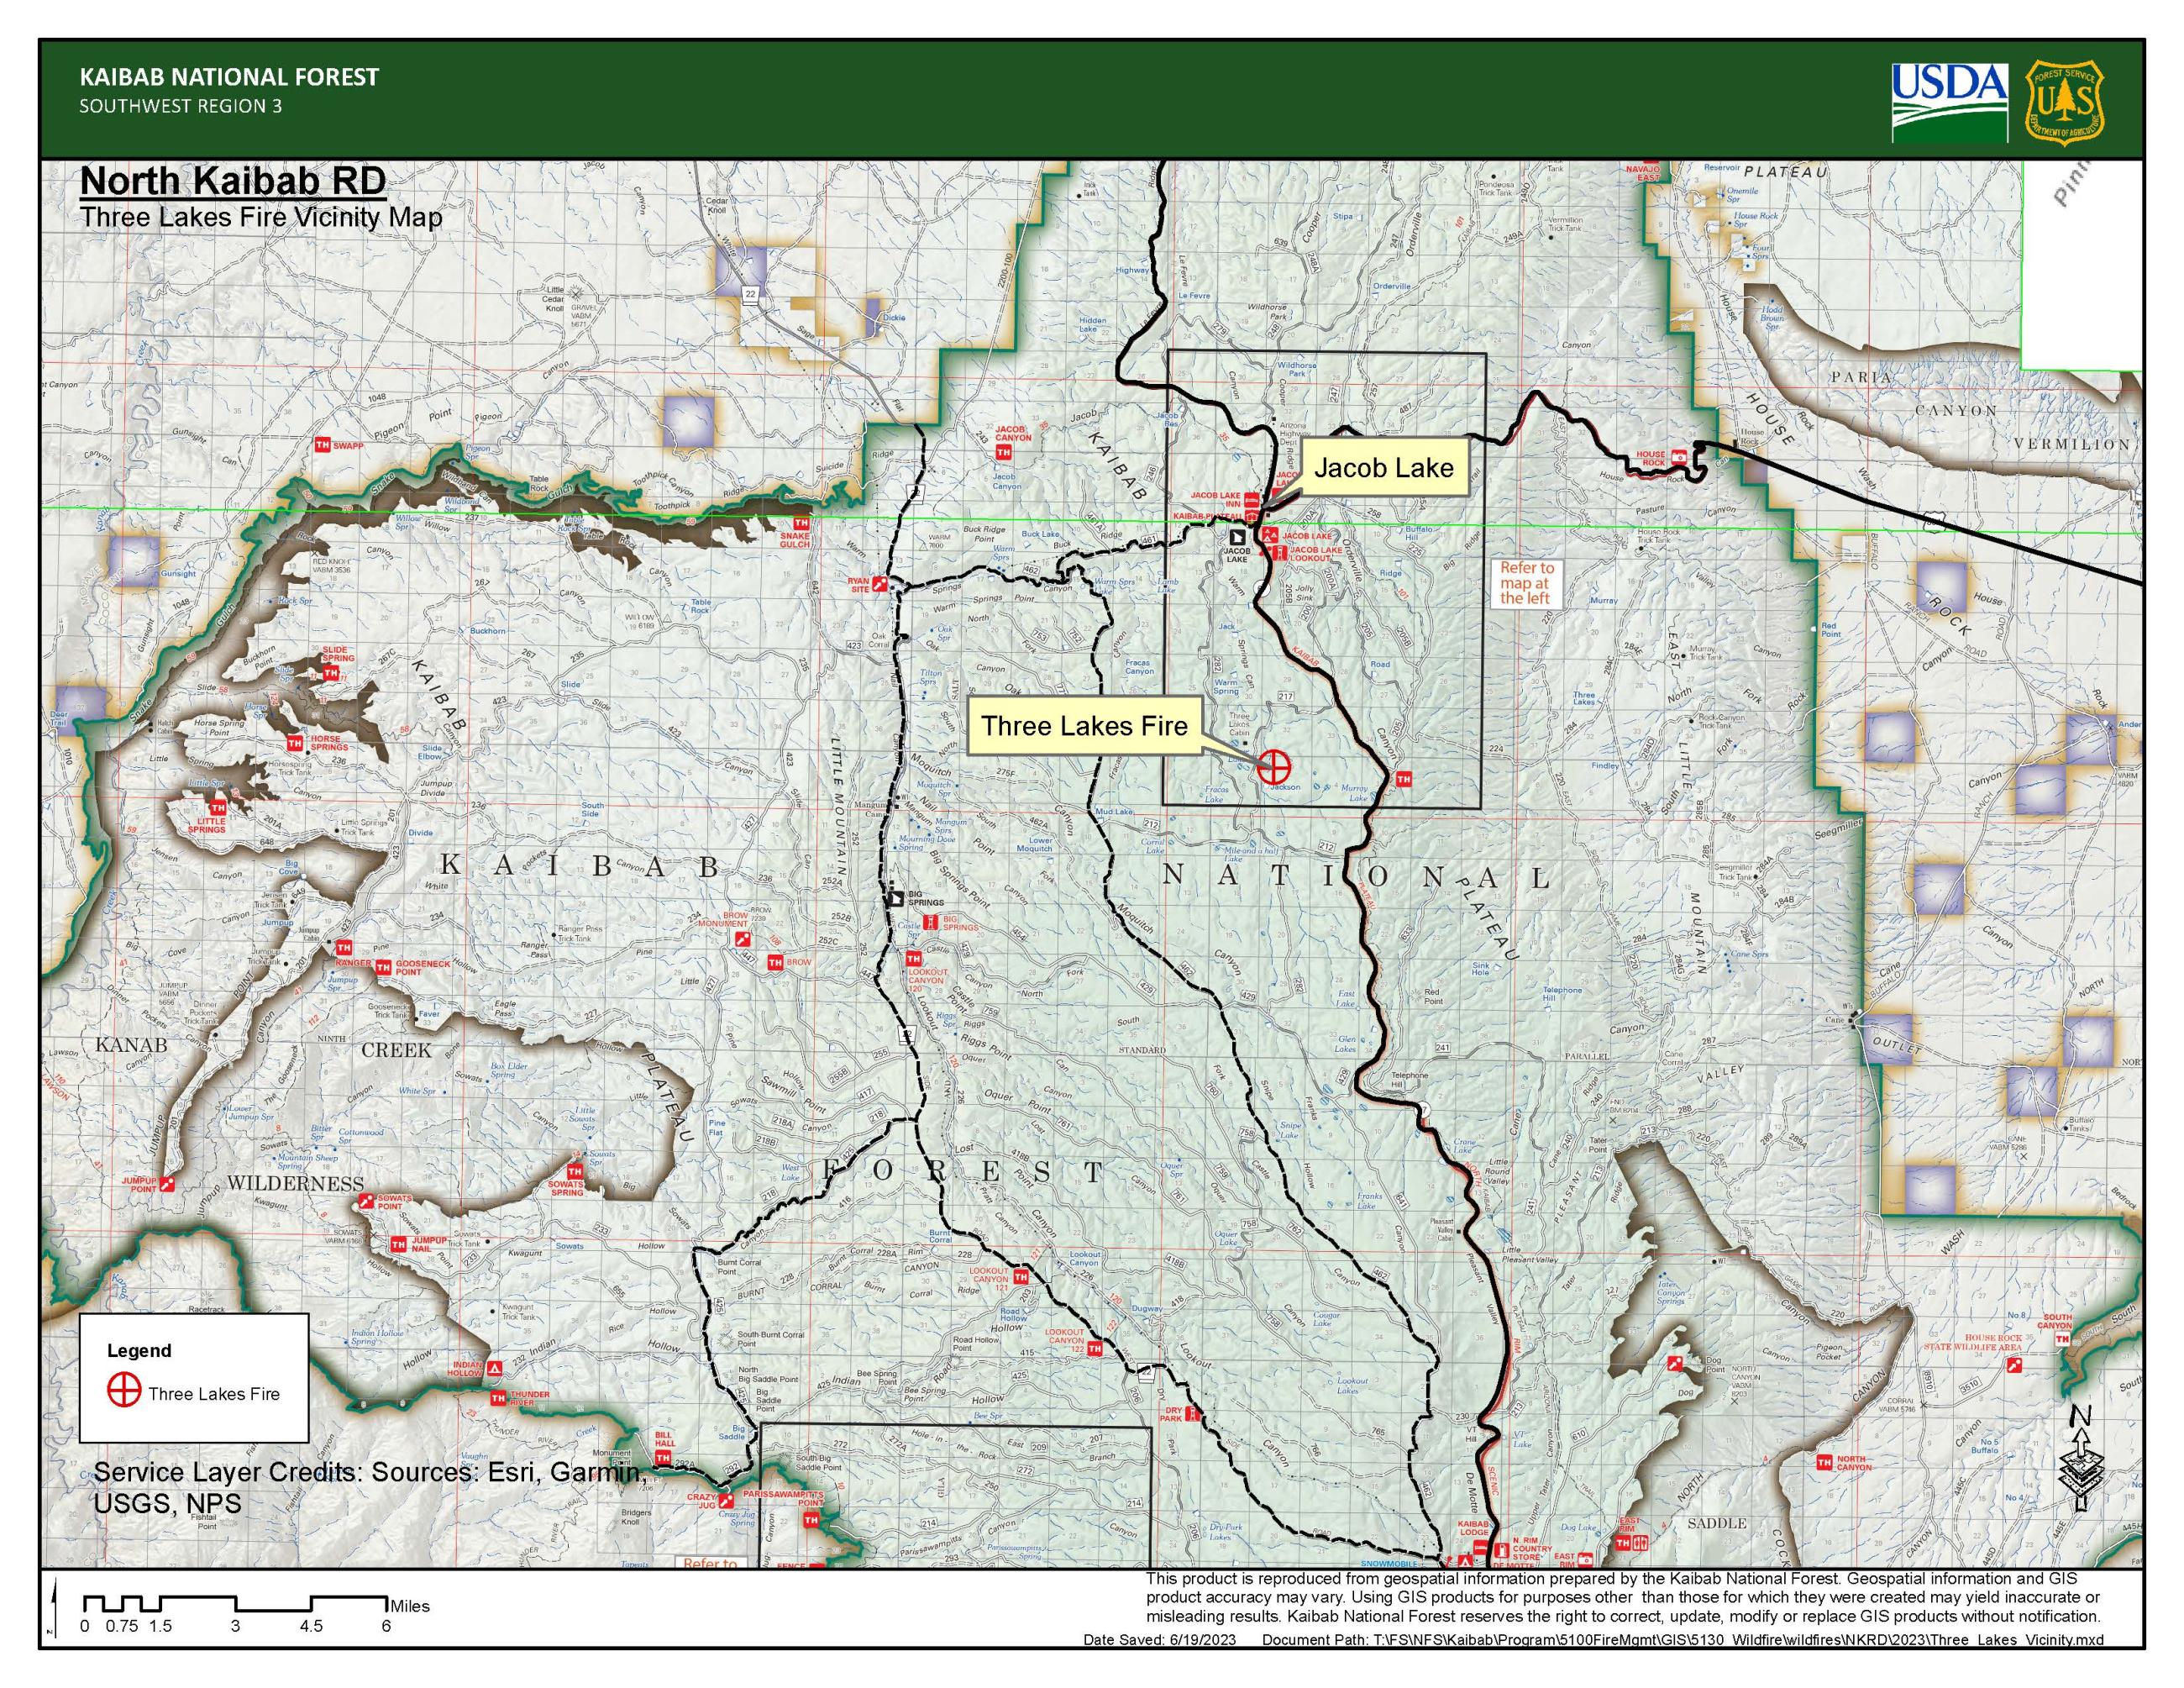 Map of the vicinity of the Three Lakes Fire on the North Kaibab Ranger District